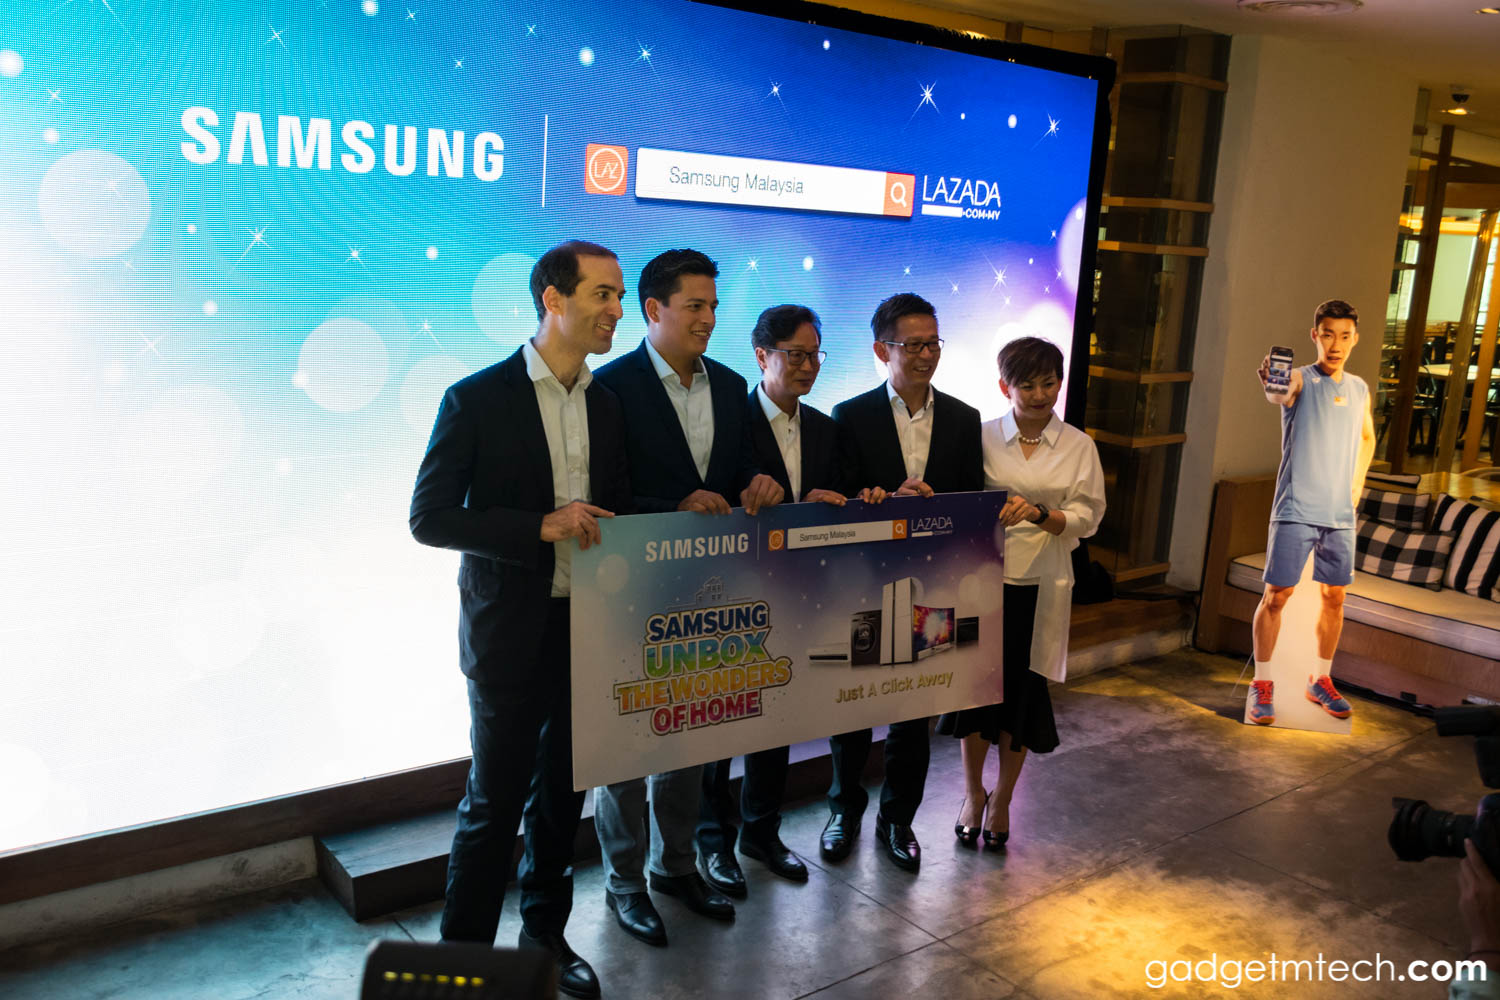 Samsung Malaysia Launches ‘Unbox the Wonders of Home’ Campaign with Lazada Malaysia